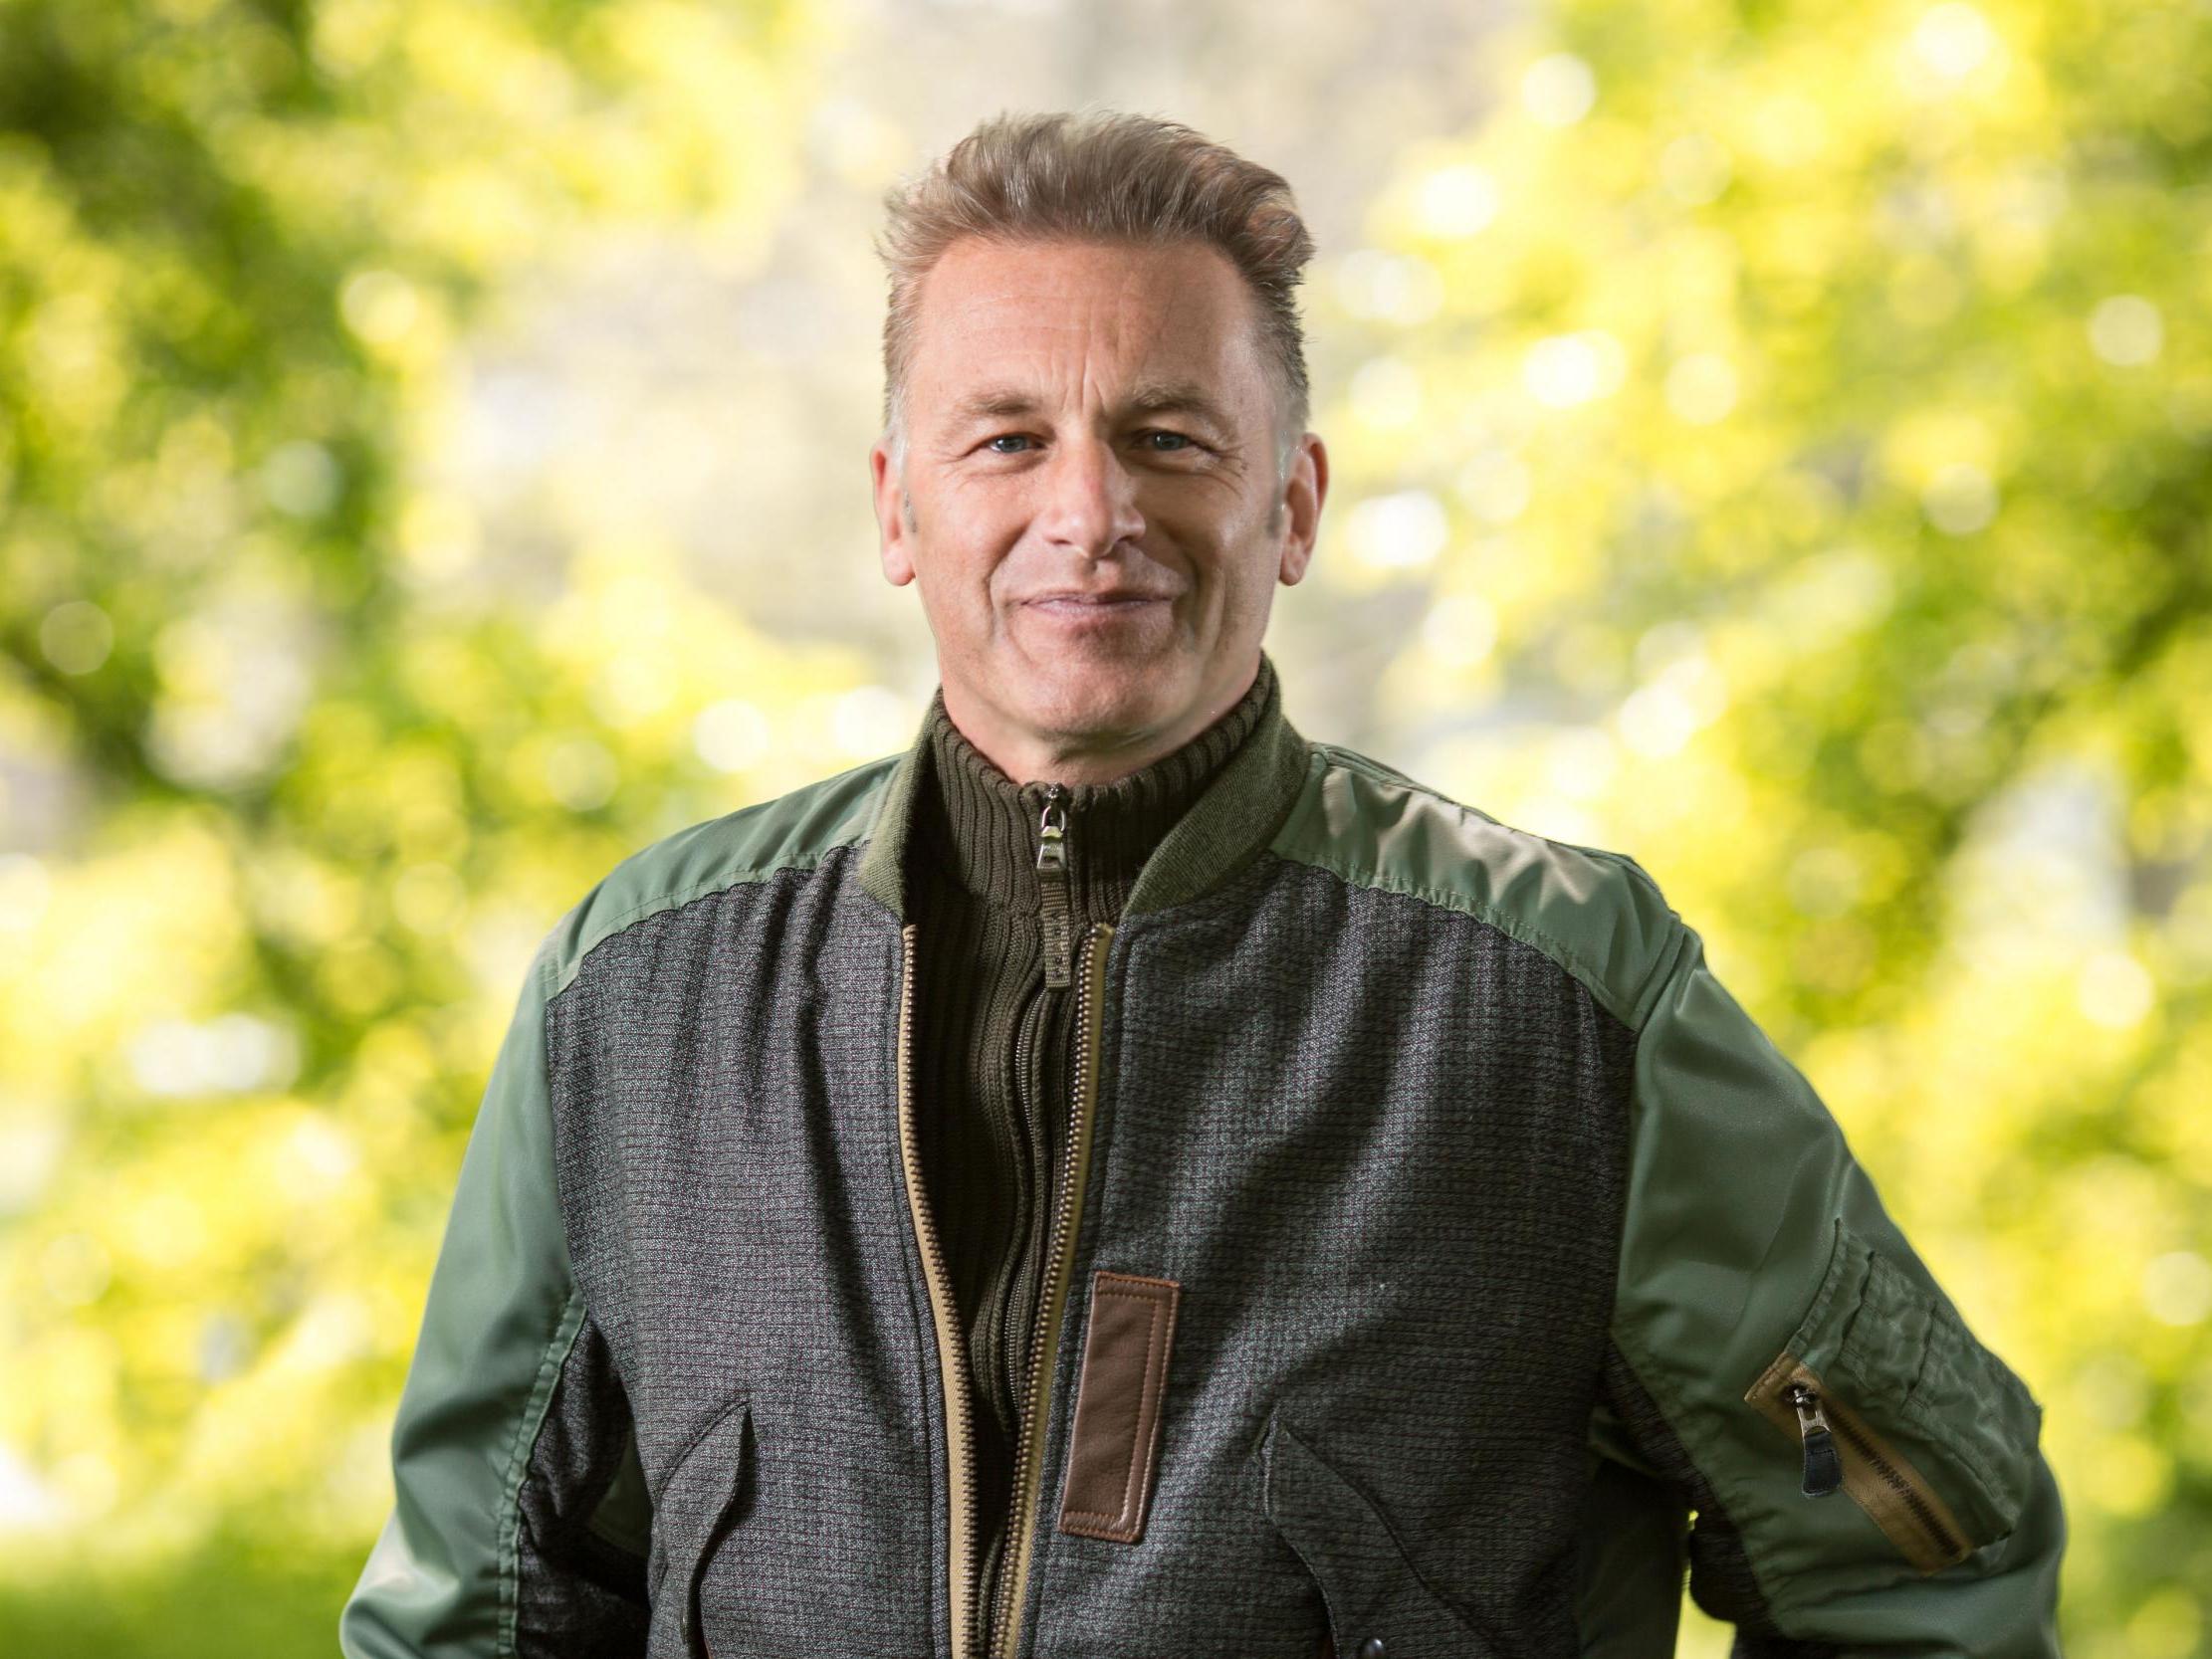 Chris Packham extols the ‘power and therapy of the natural world’